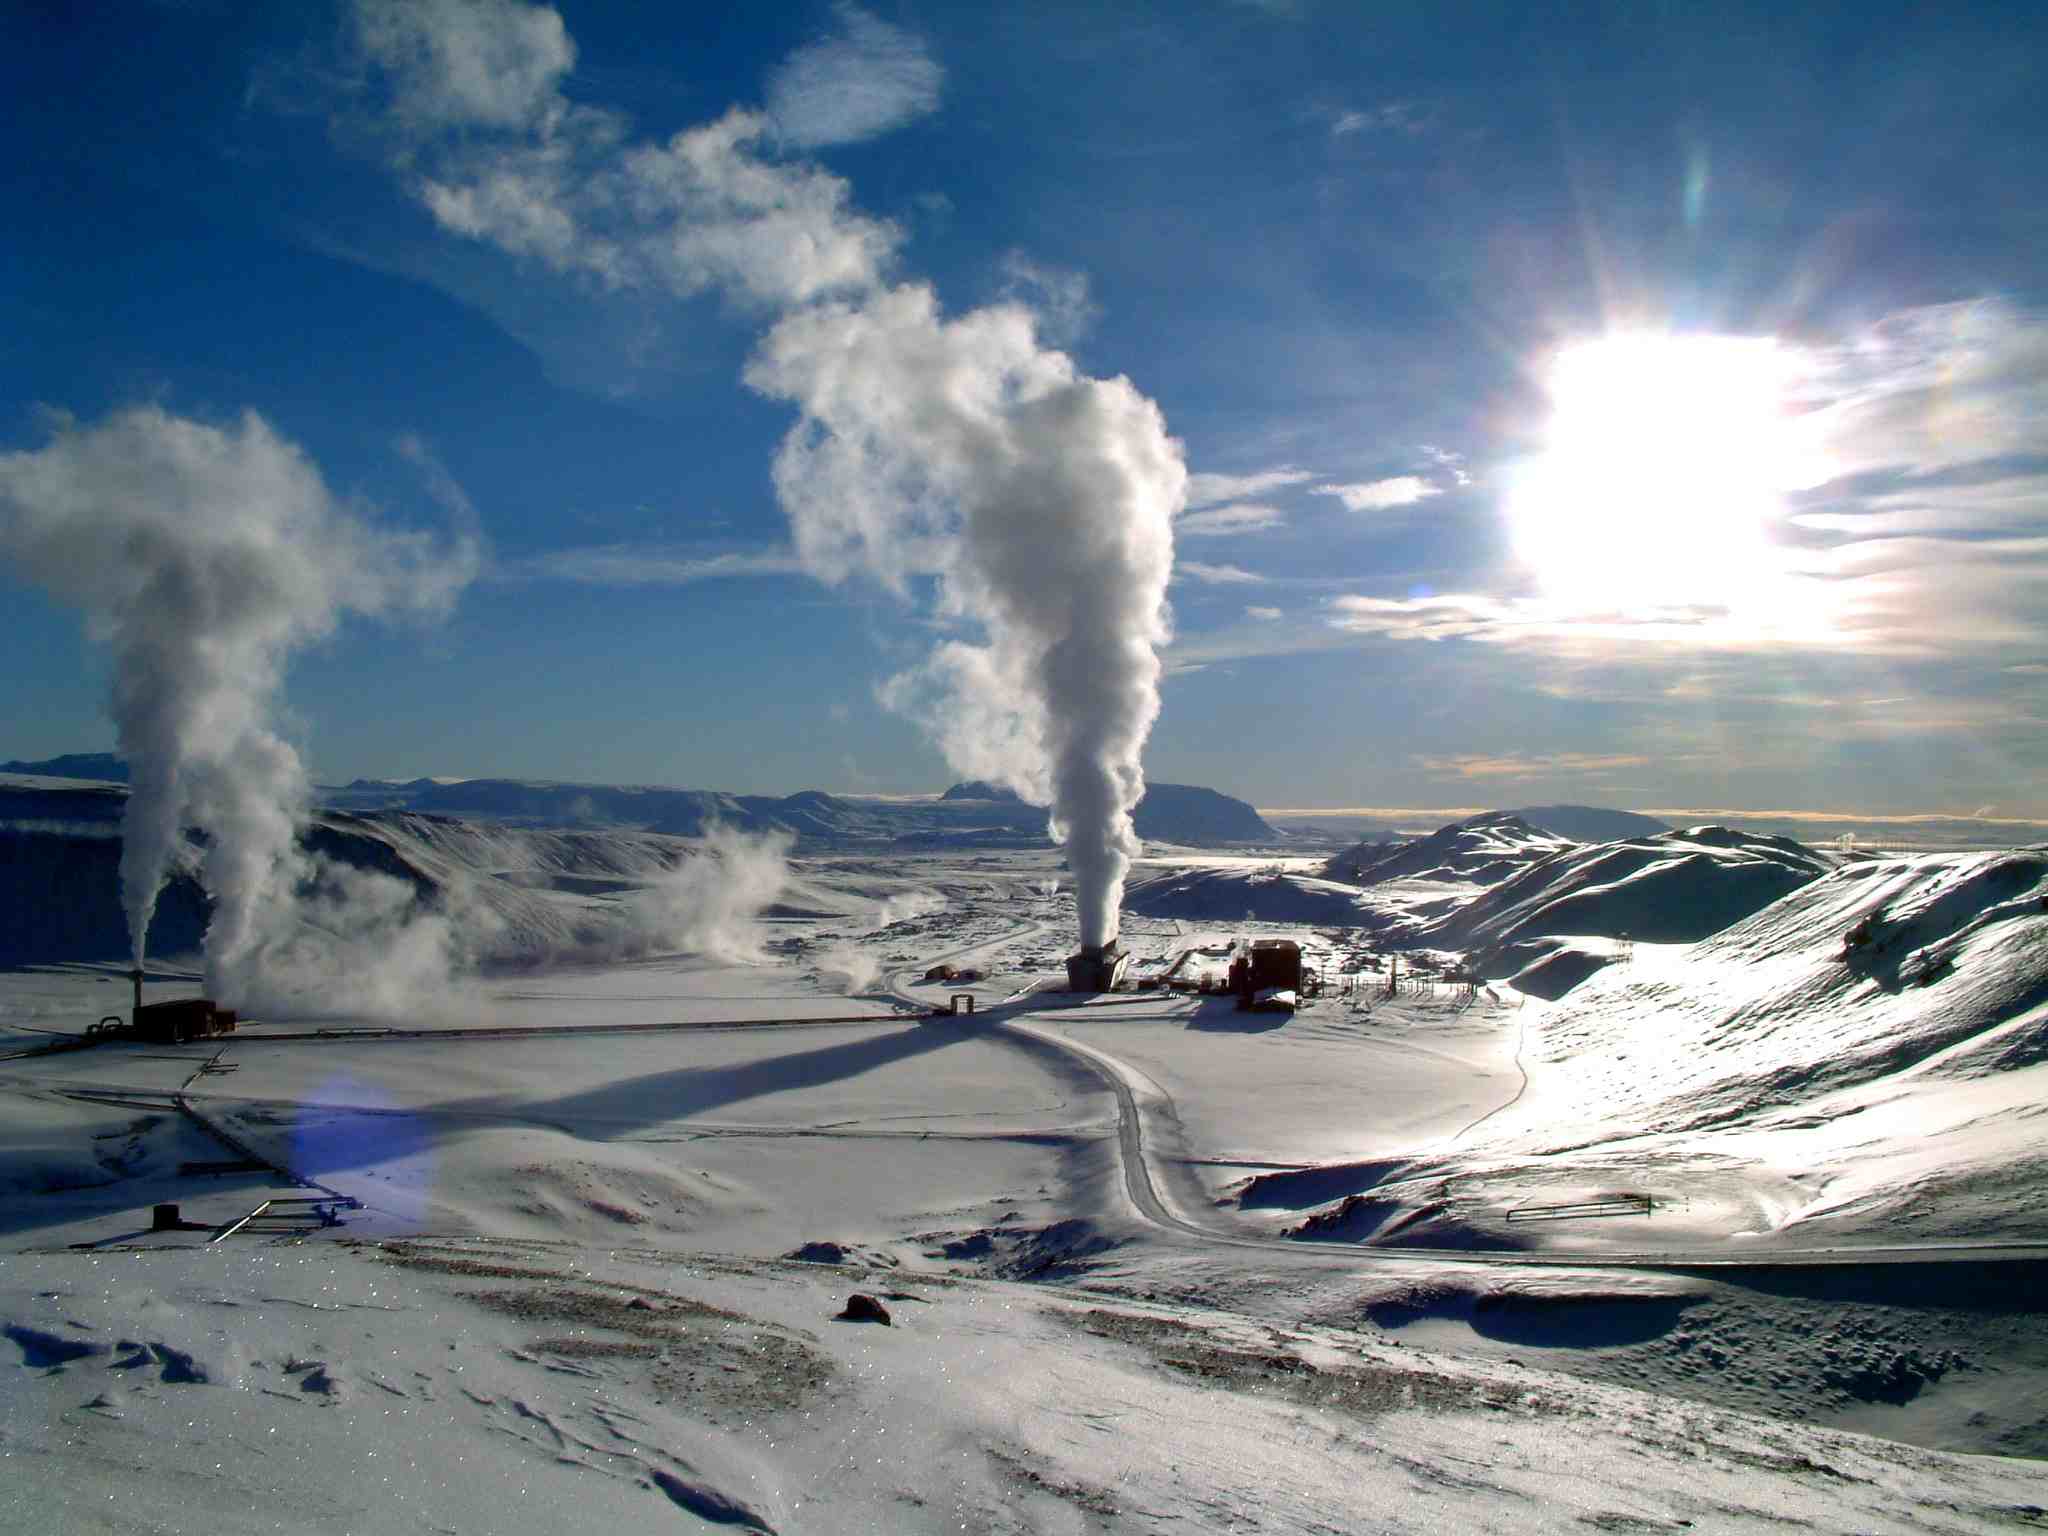 Verne Global in Iceland scores high | Askja Energy - The Essential ...